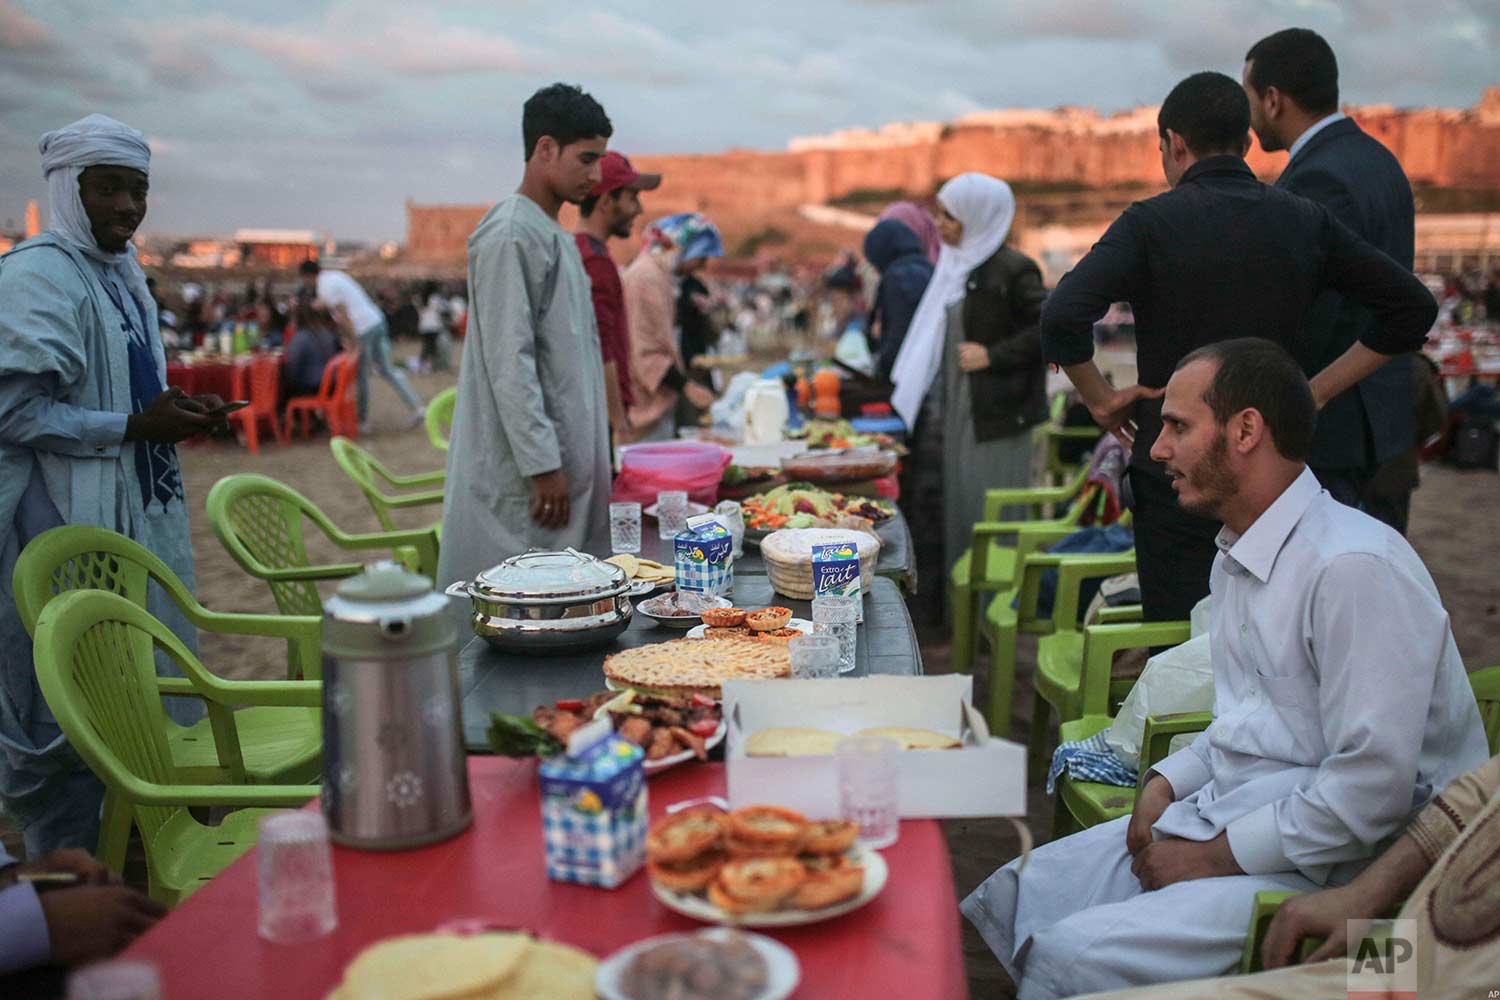  People wait to break their fast on the beach in the holy month of Ramadan, in Rabat, Morocco, Saturday, June 9, 2018. (AP Photo/Mosa'ab Elshamy) 